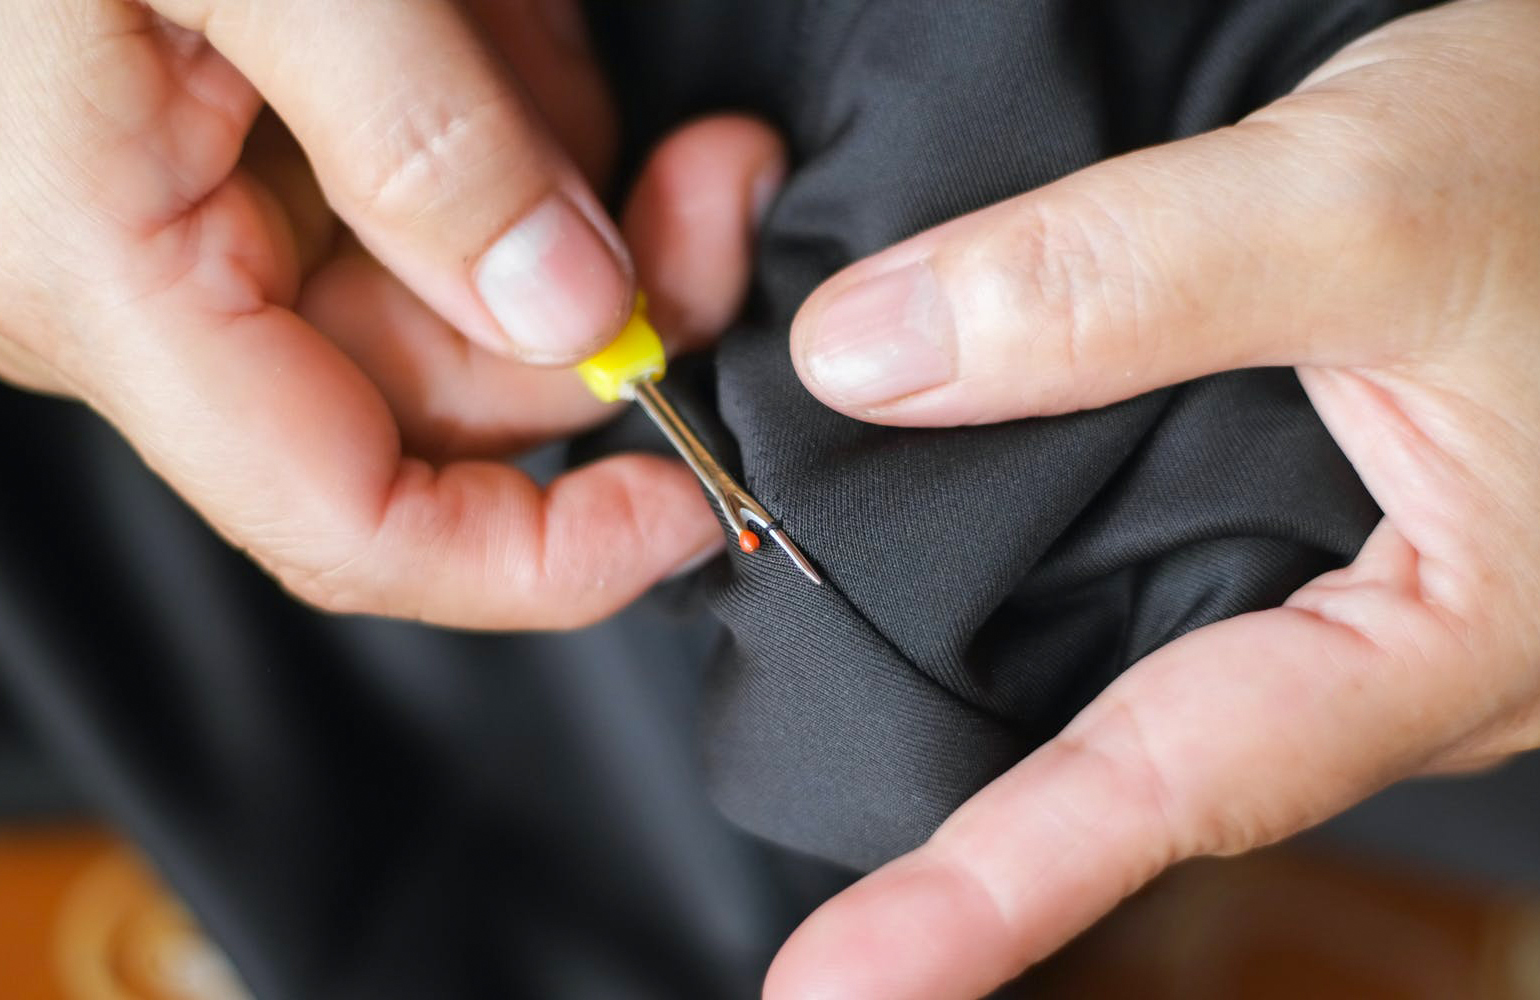 removing stitches from suit pocket